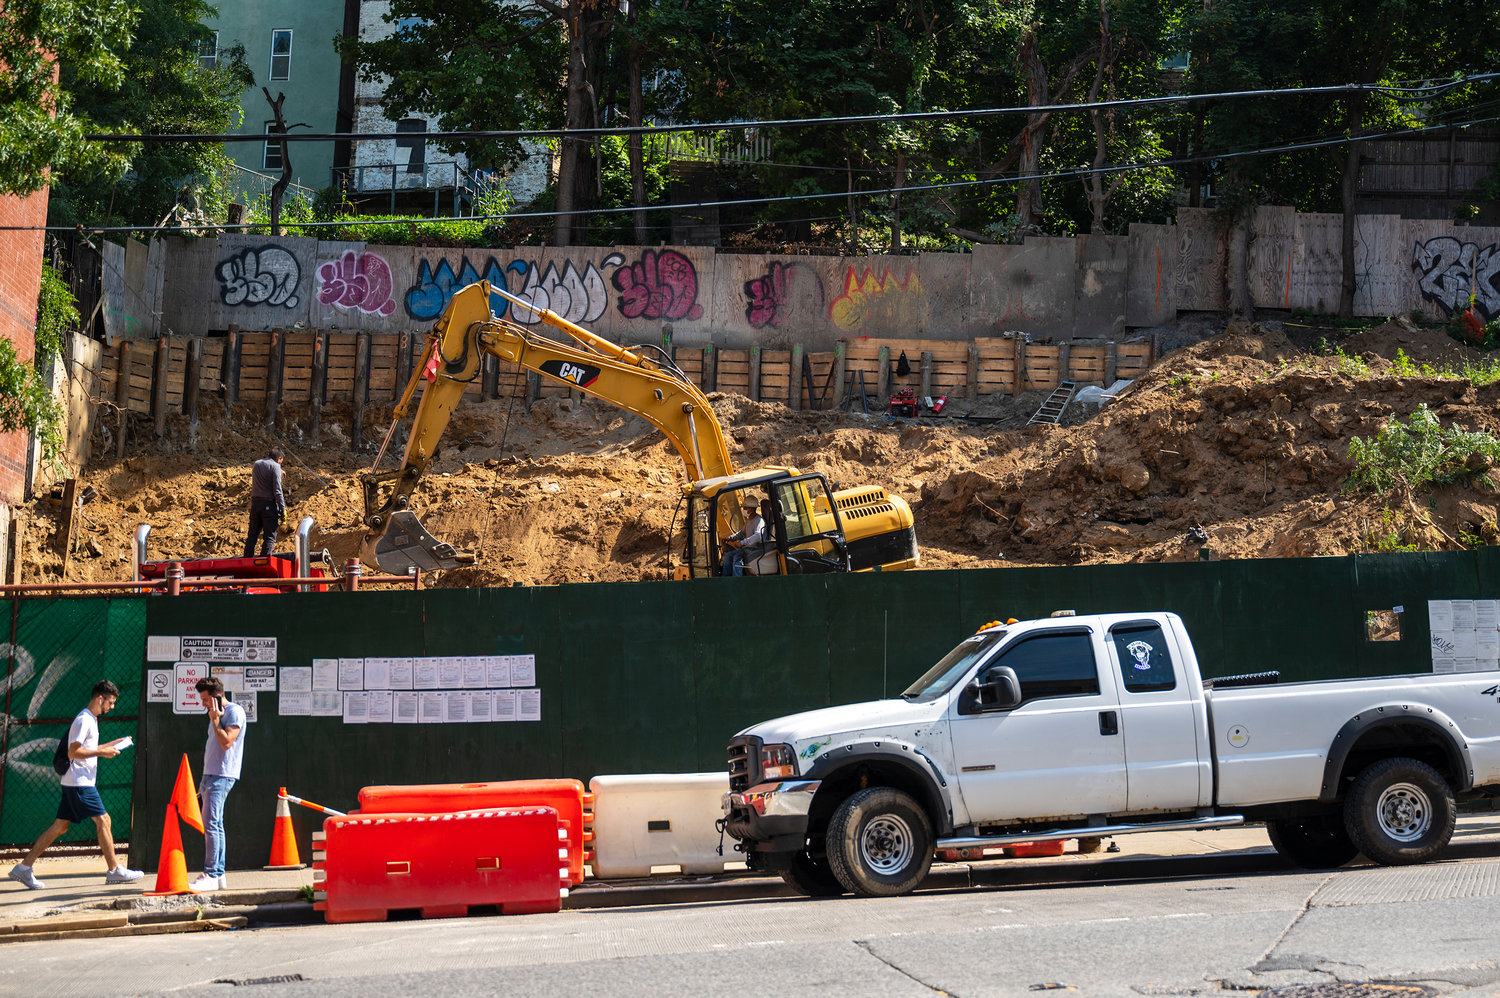 Excavation is underway at 215 and 229 West Kingsbridge Road, where owner Paul Durgaj has filed permits to build two mixed-use residential buildings, bringing 60 new market-rate apartments to Kingsbridge Heights.